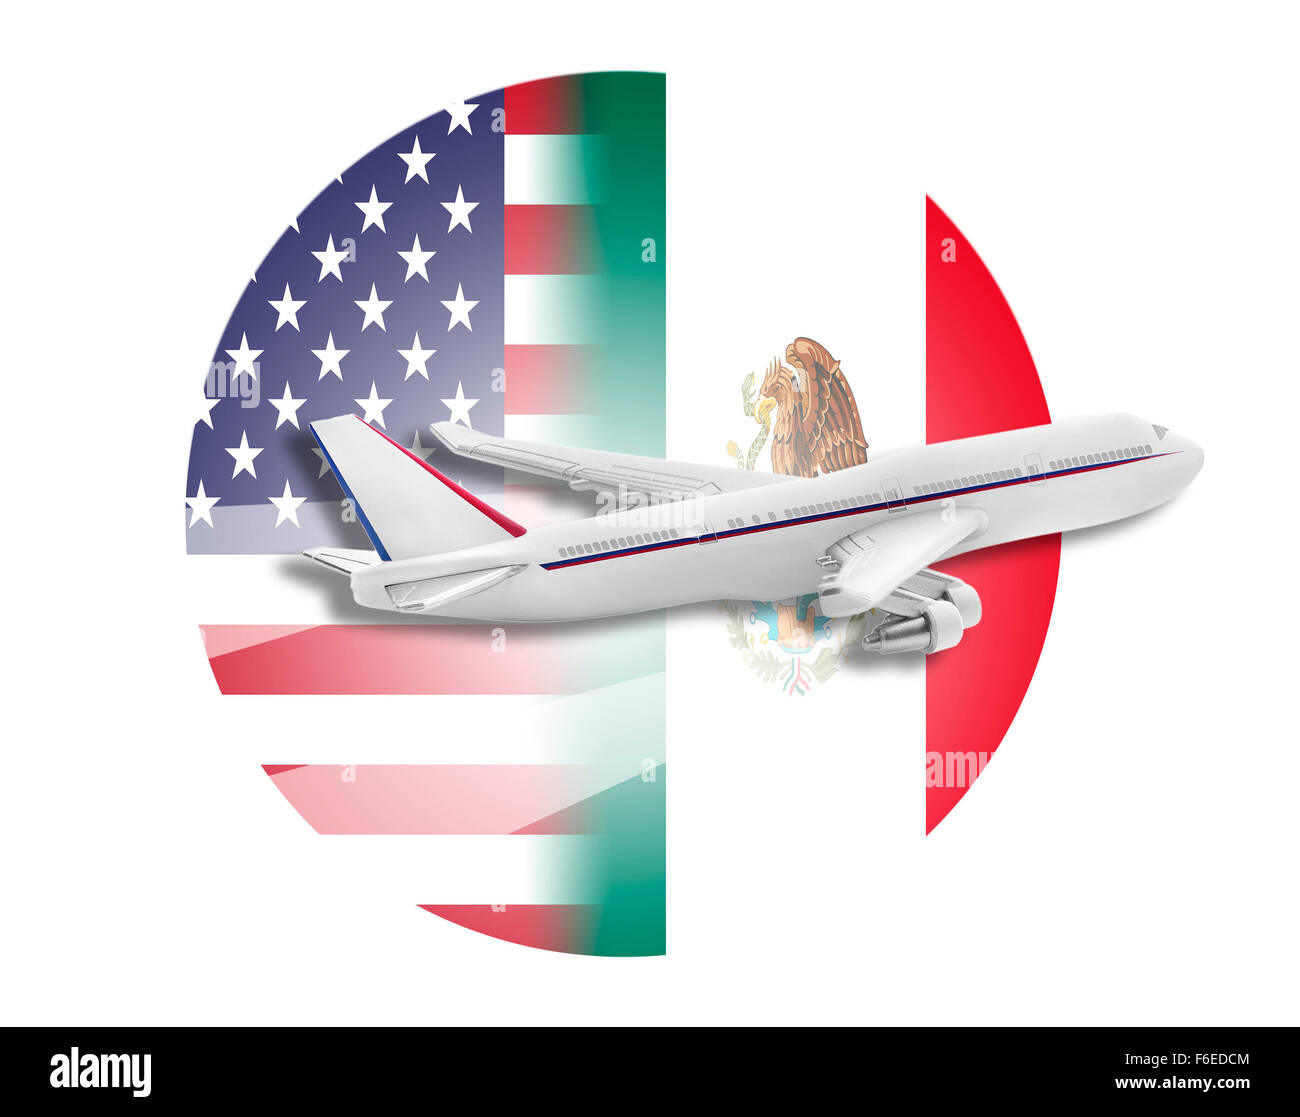 Plane, United States and Mexico flags. Stock Photo